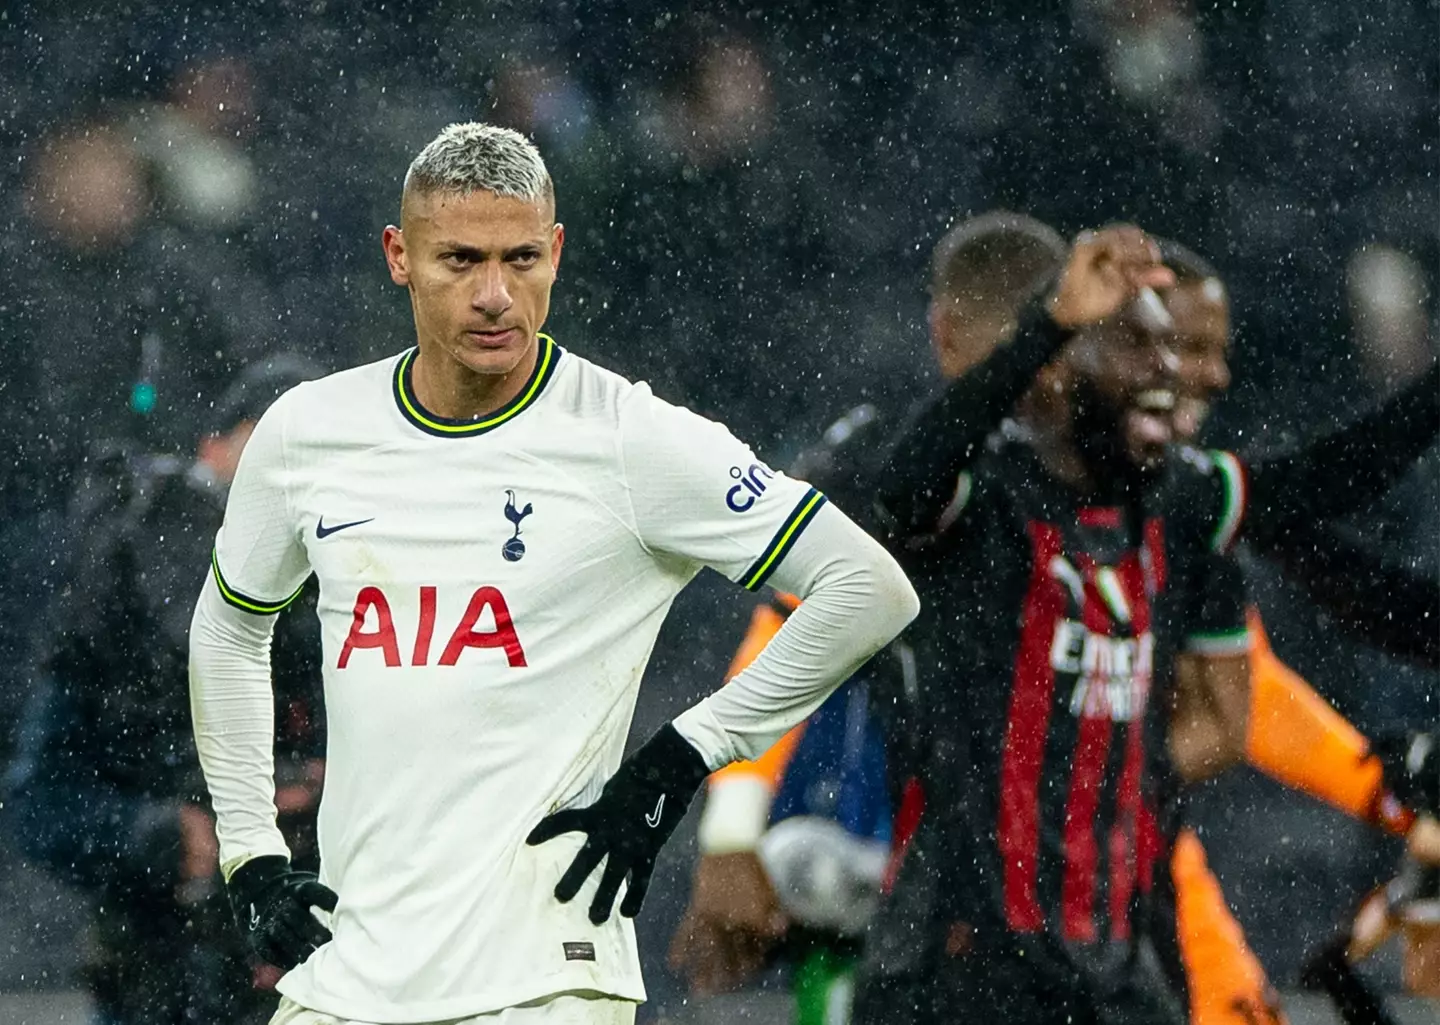 Richarlison cuts a dejected figure after Tottenham's defeat to AC Milan. Image: PA